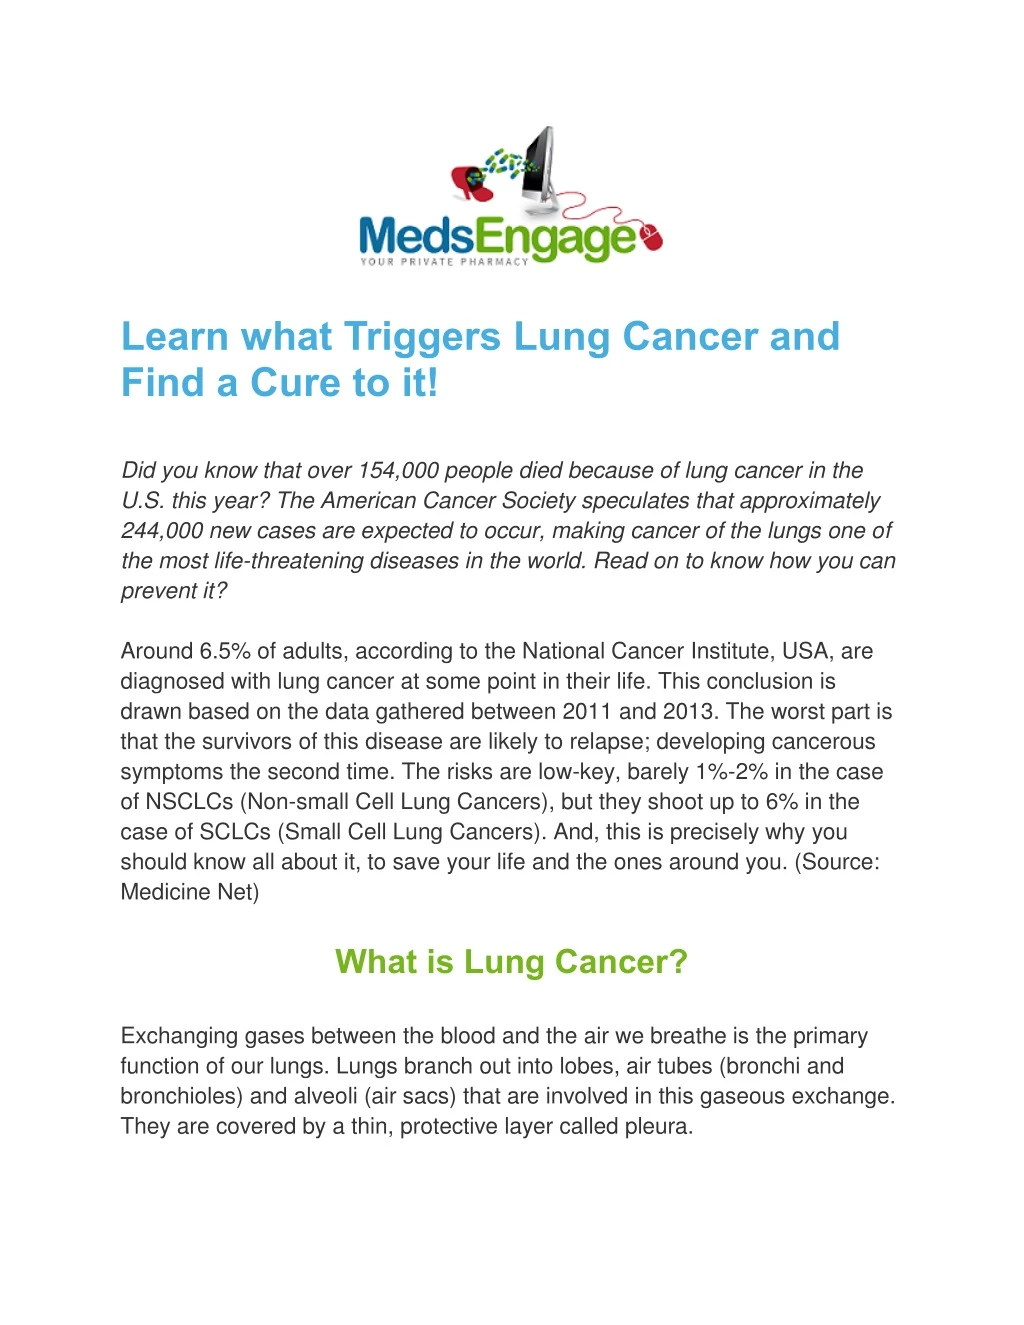 learn what triggers lung cancer and find a cure